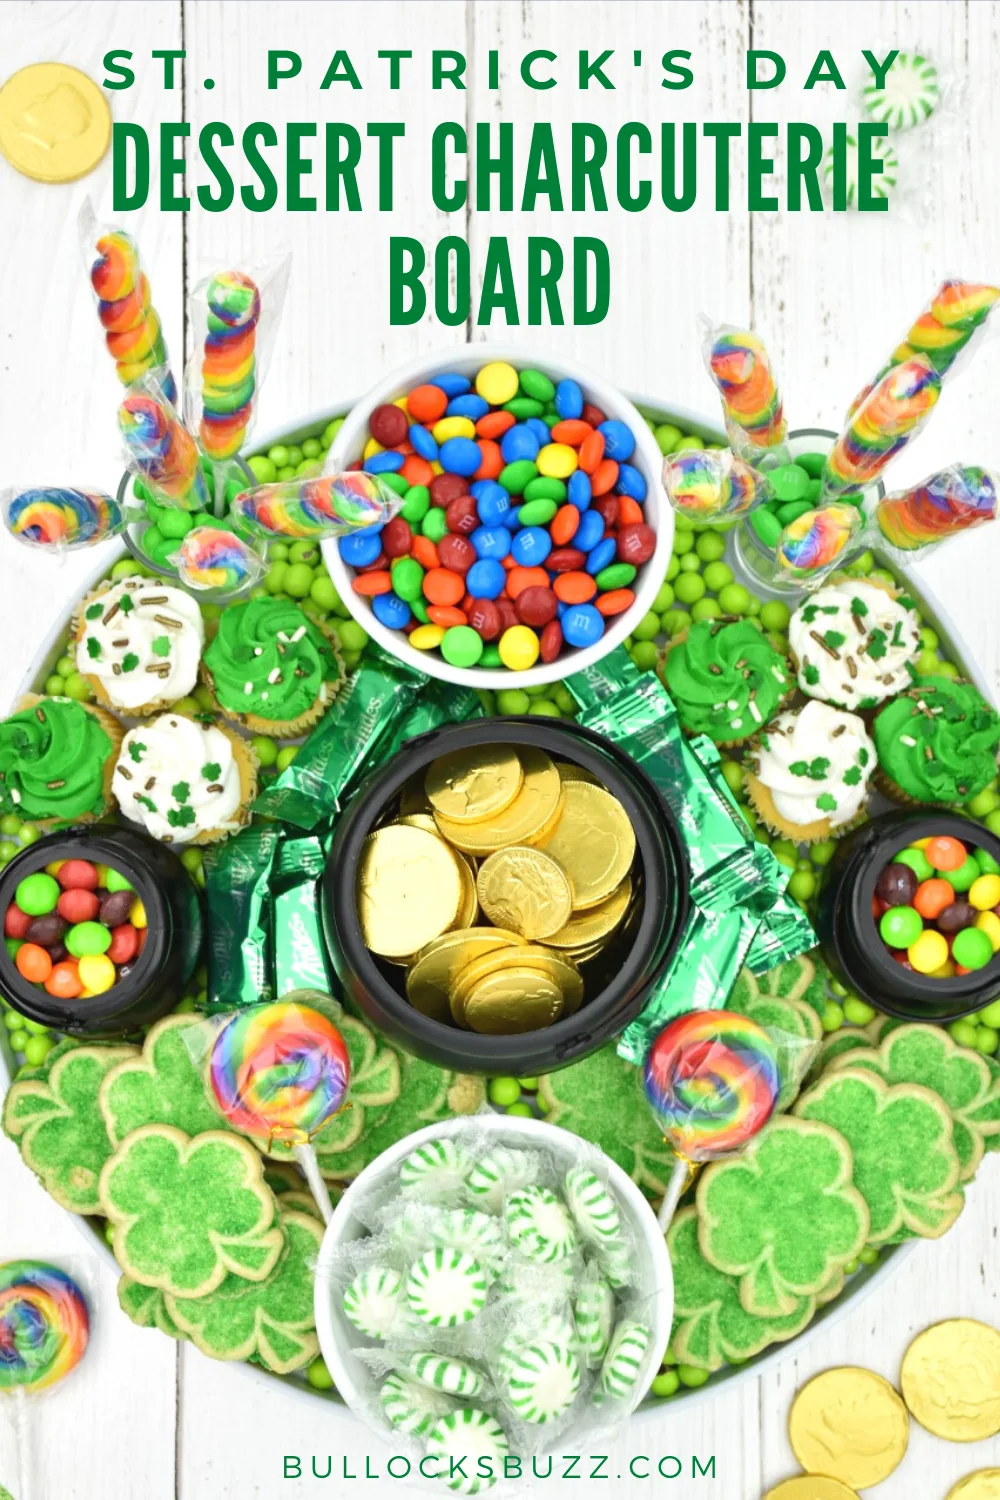 This eye-catching Dessert Charcuterie Board for St. Patrick's Day is SO much tasty fun! From shamrocks to rainbows plus a pot of gold, this colorful sweet treat has it all! #stpatricksday #recipe #charcuterieboard